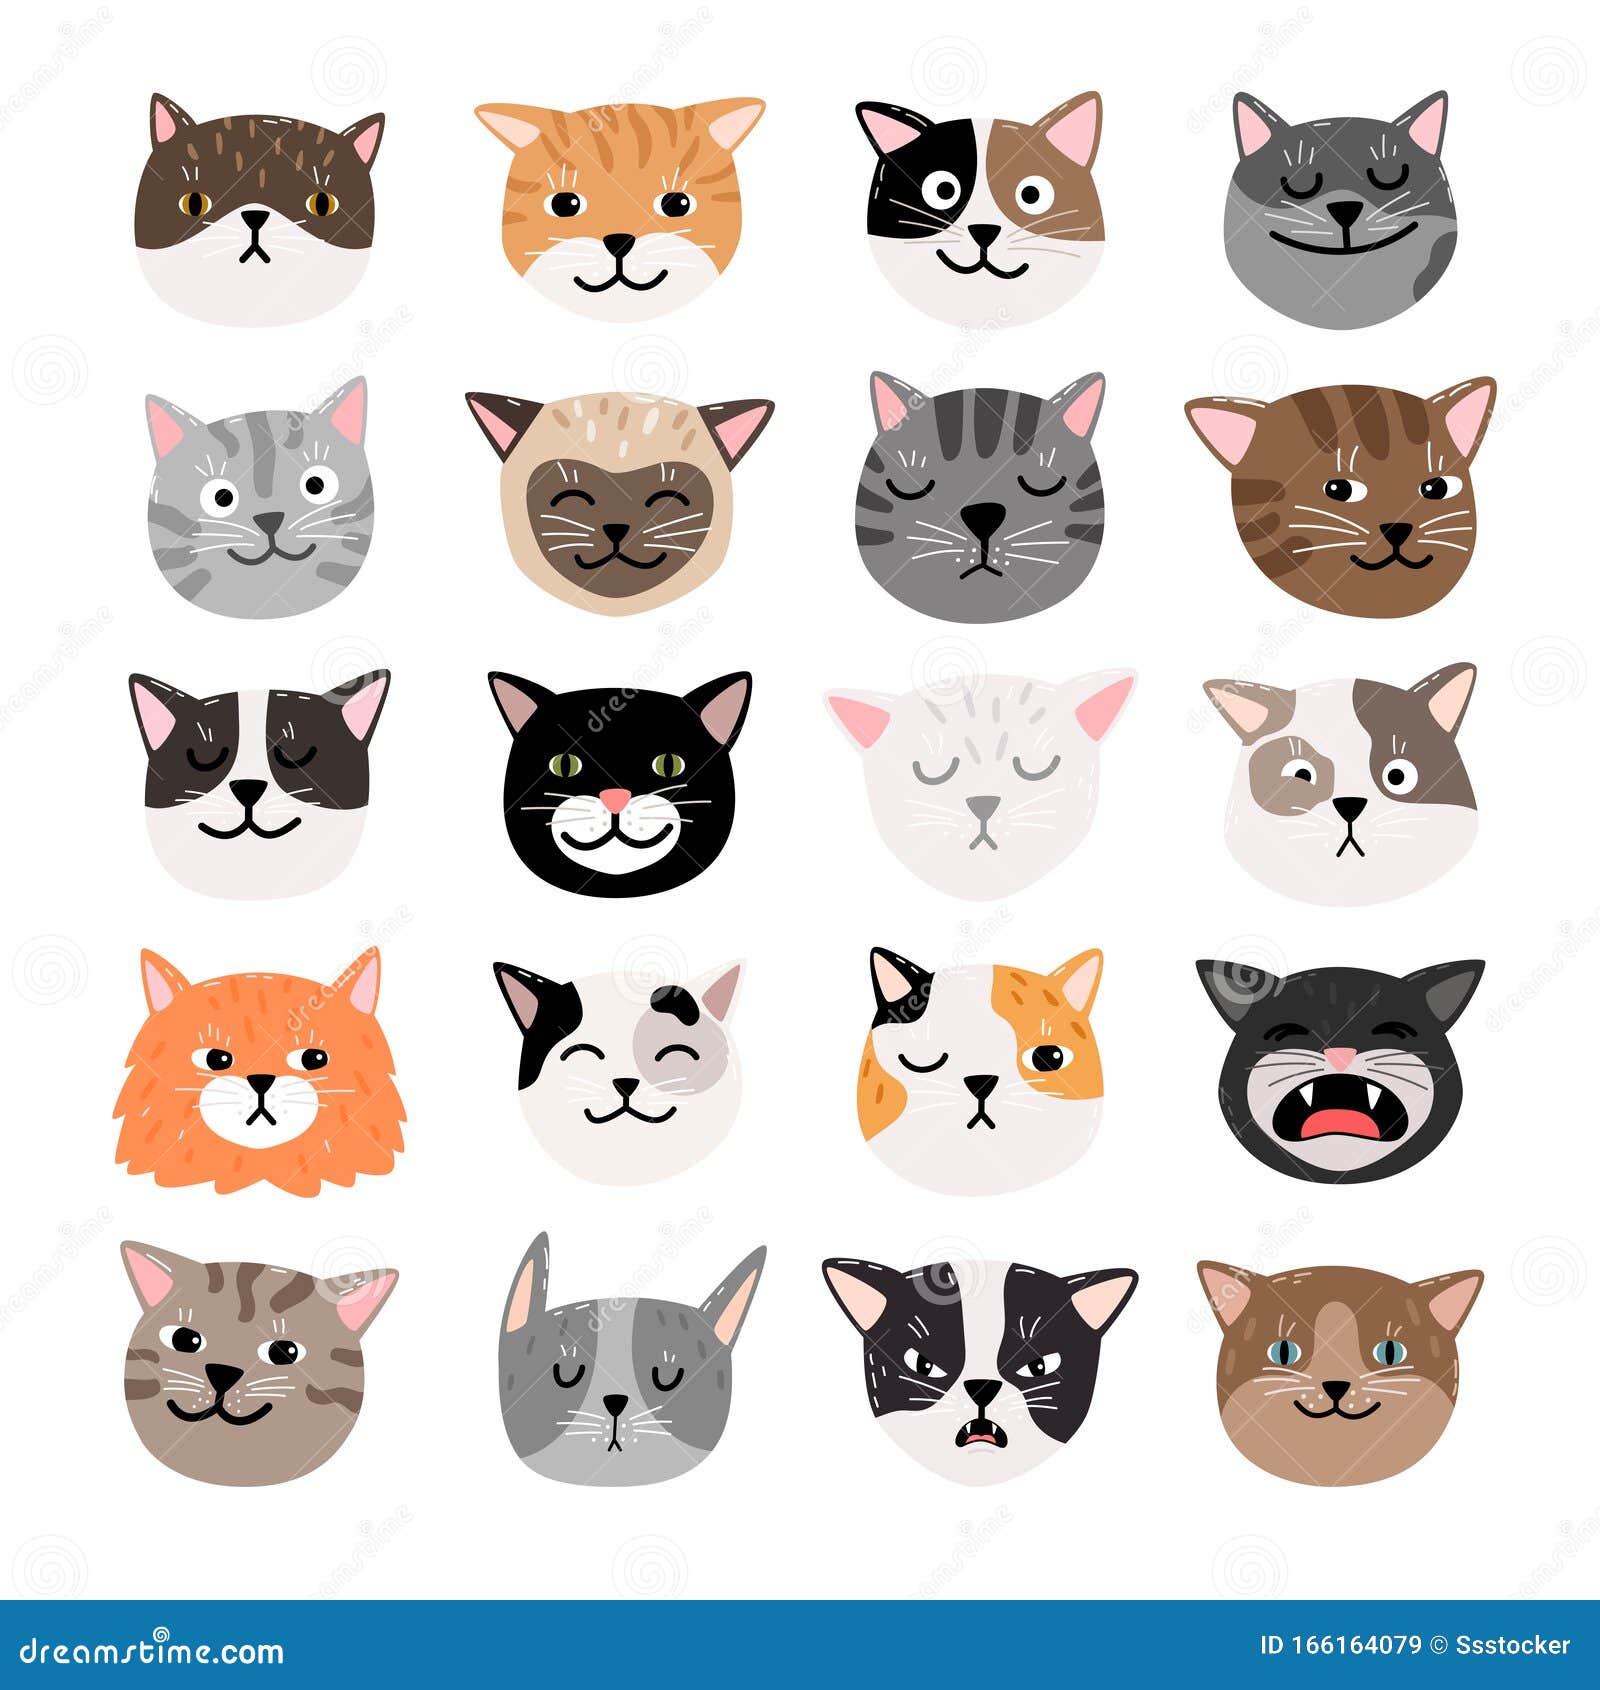 Cats heads. Cute funny domestic animals colored heads happy faces  expressive emotions vector set. Cat animal, pet funny set face illustration  #2823925